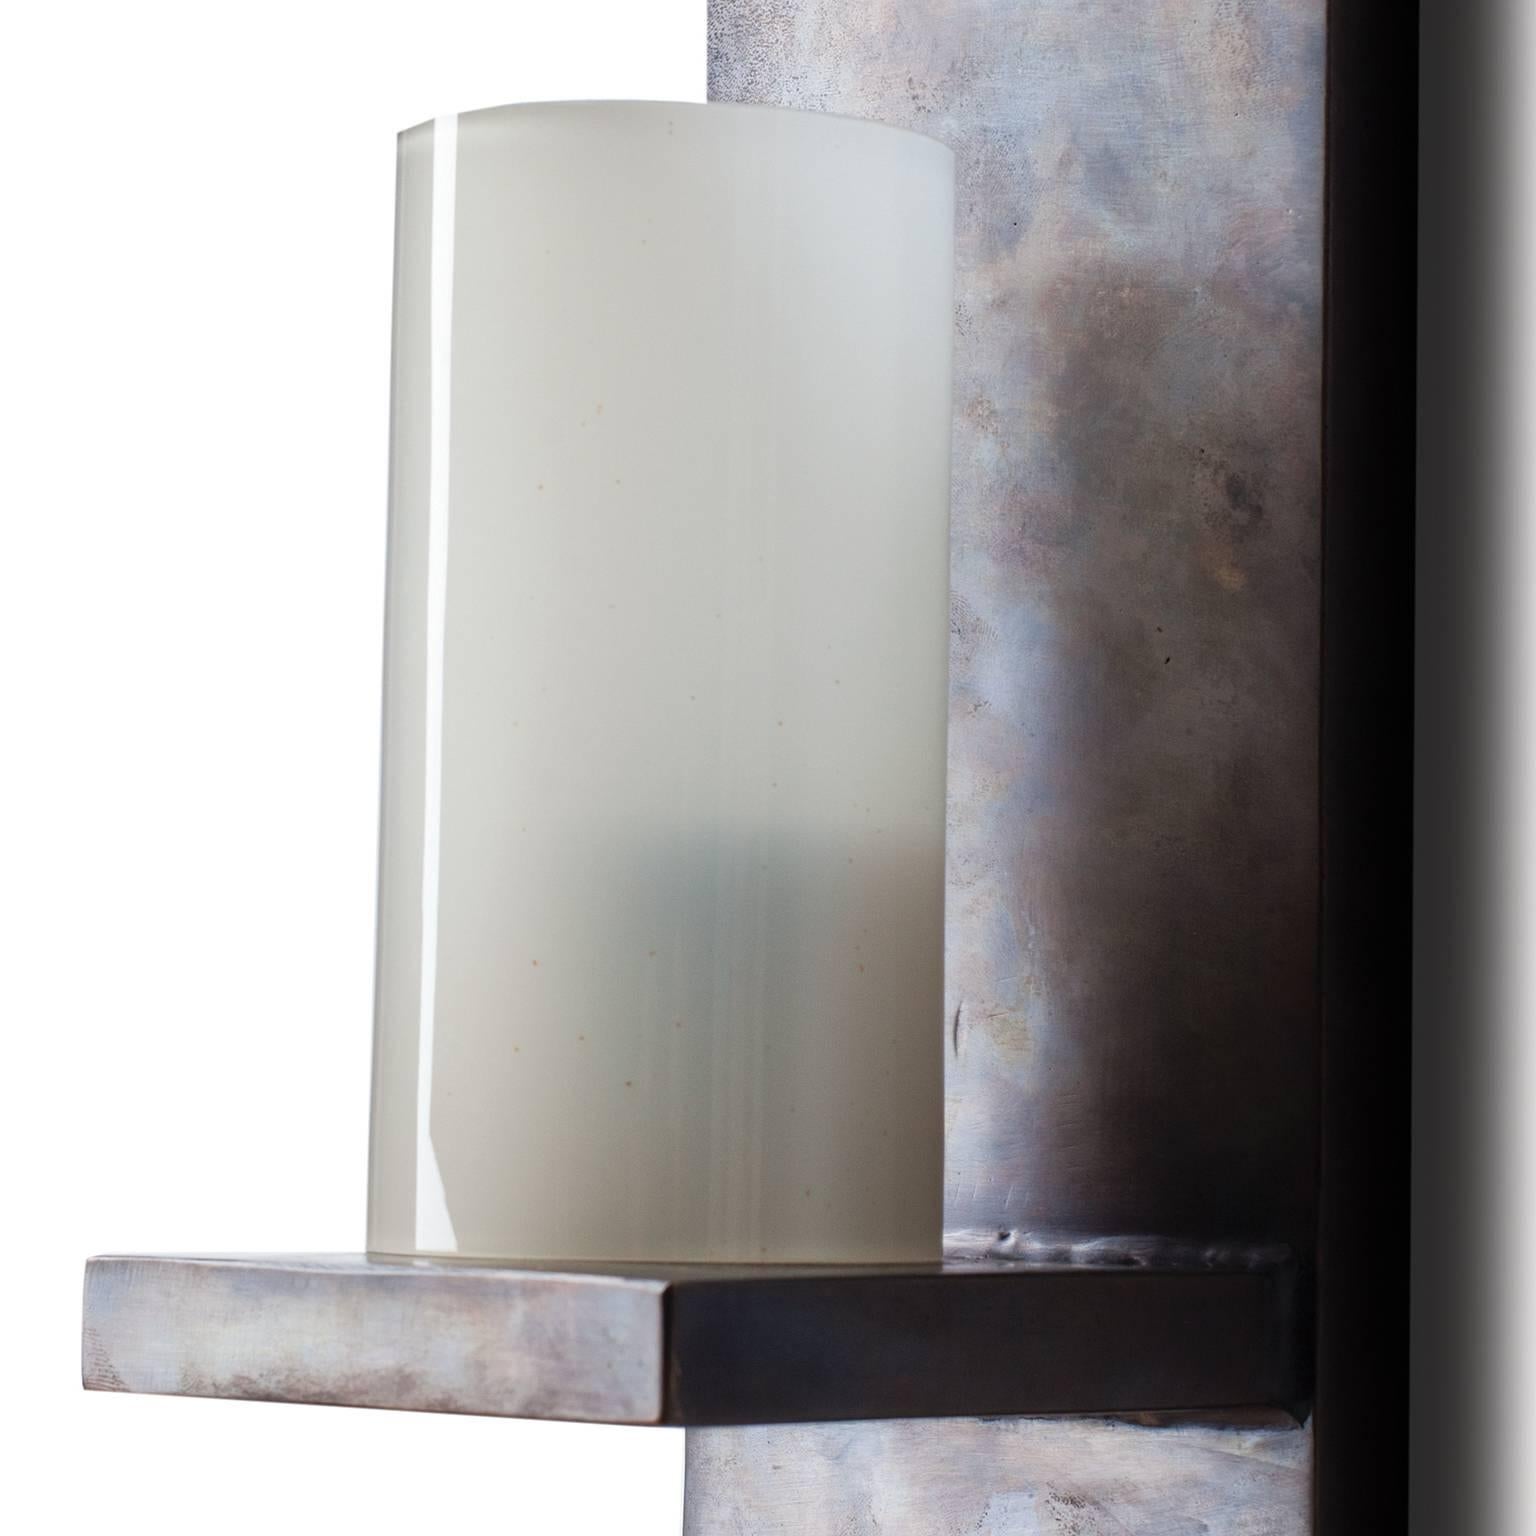 The Roca sconce is made of cast bronze and has a hand applied patina that gives a rich warm depth to the metal. The light source is housed in an opaque glass cylinder. Cast bronze has natural markings that are inherent to the process and  techniques